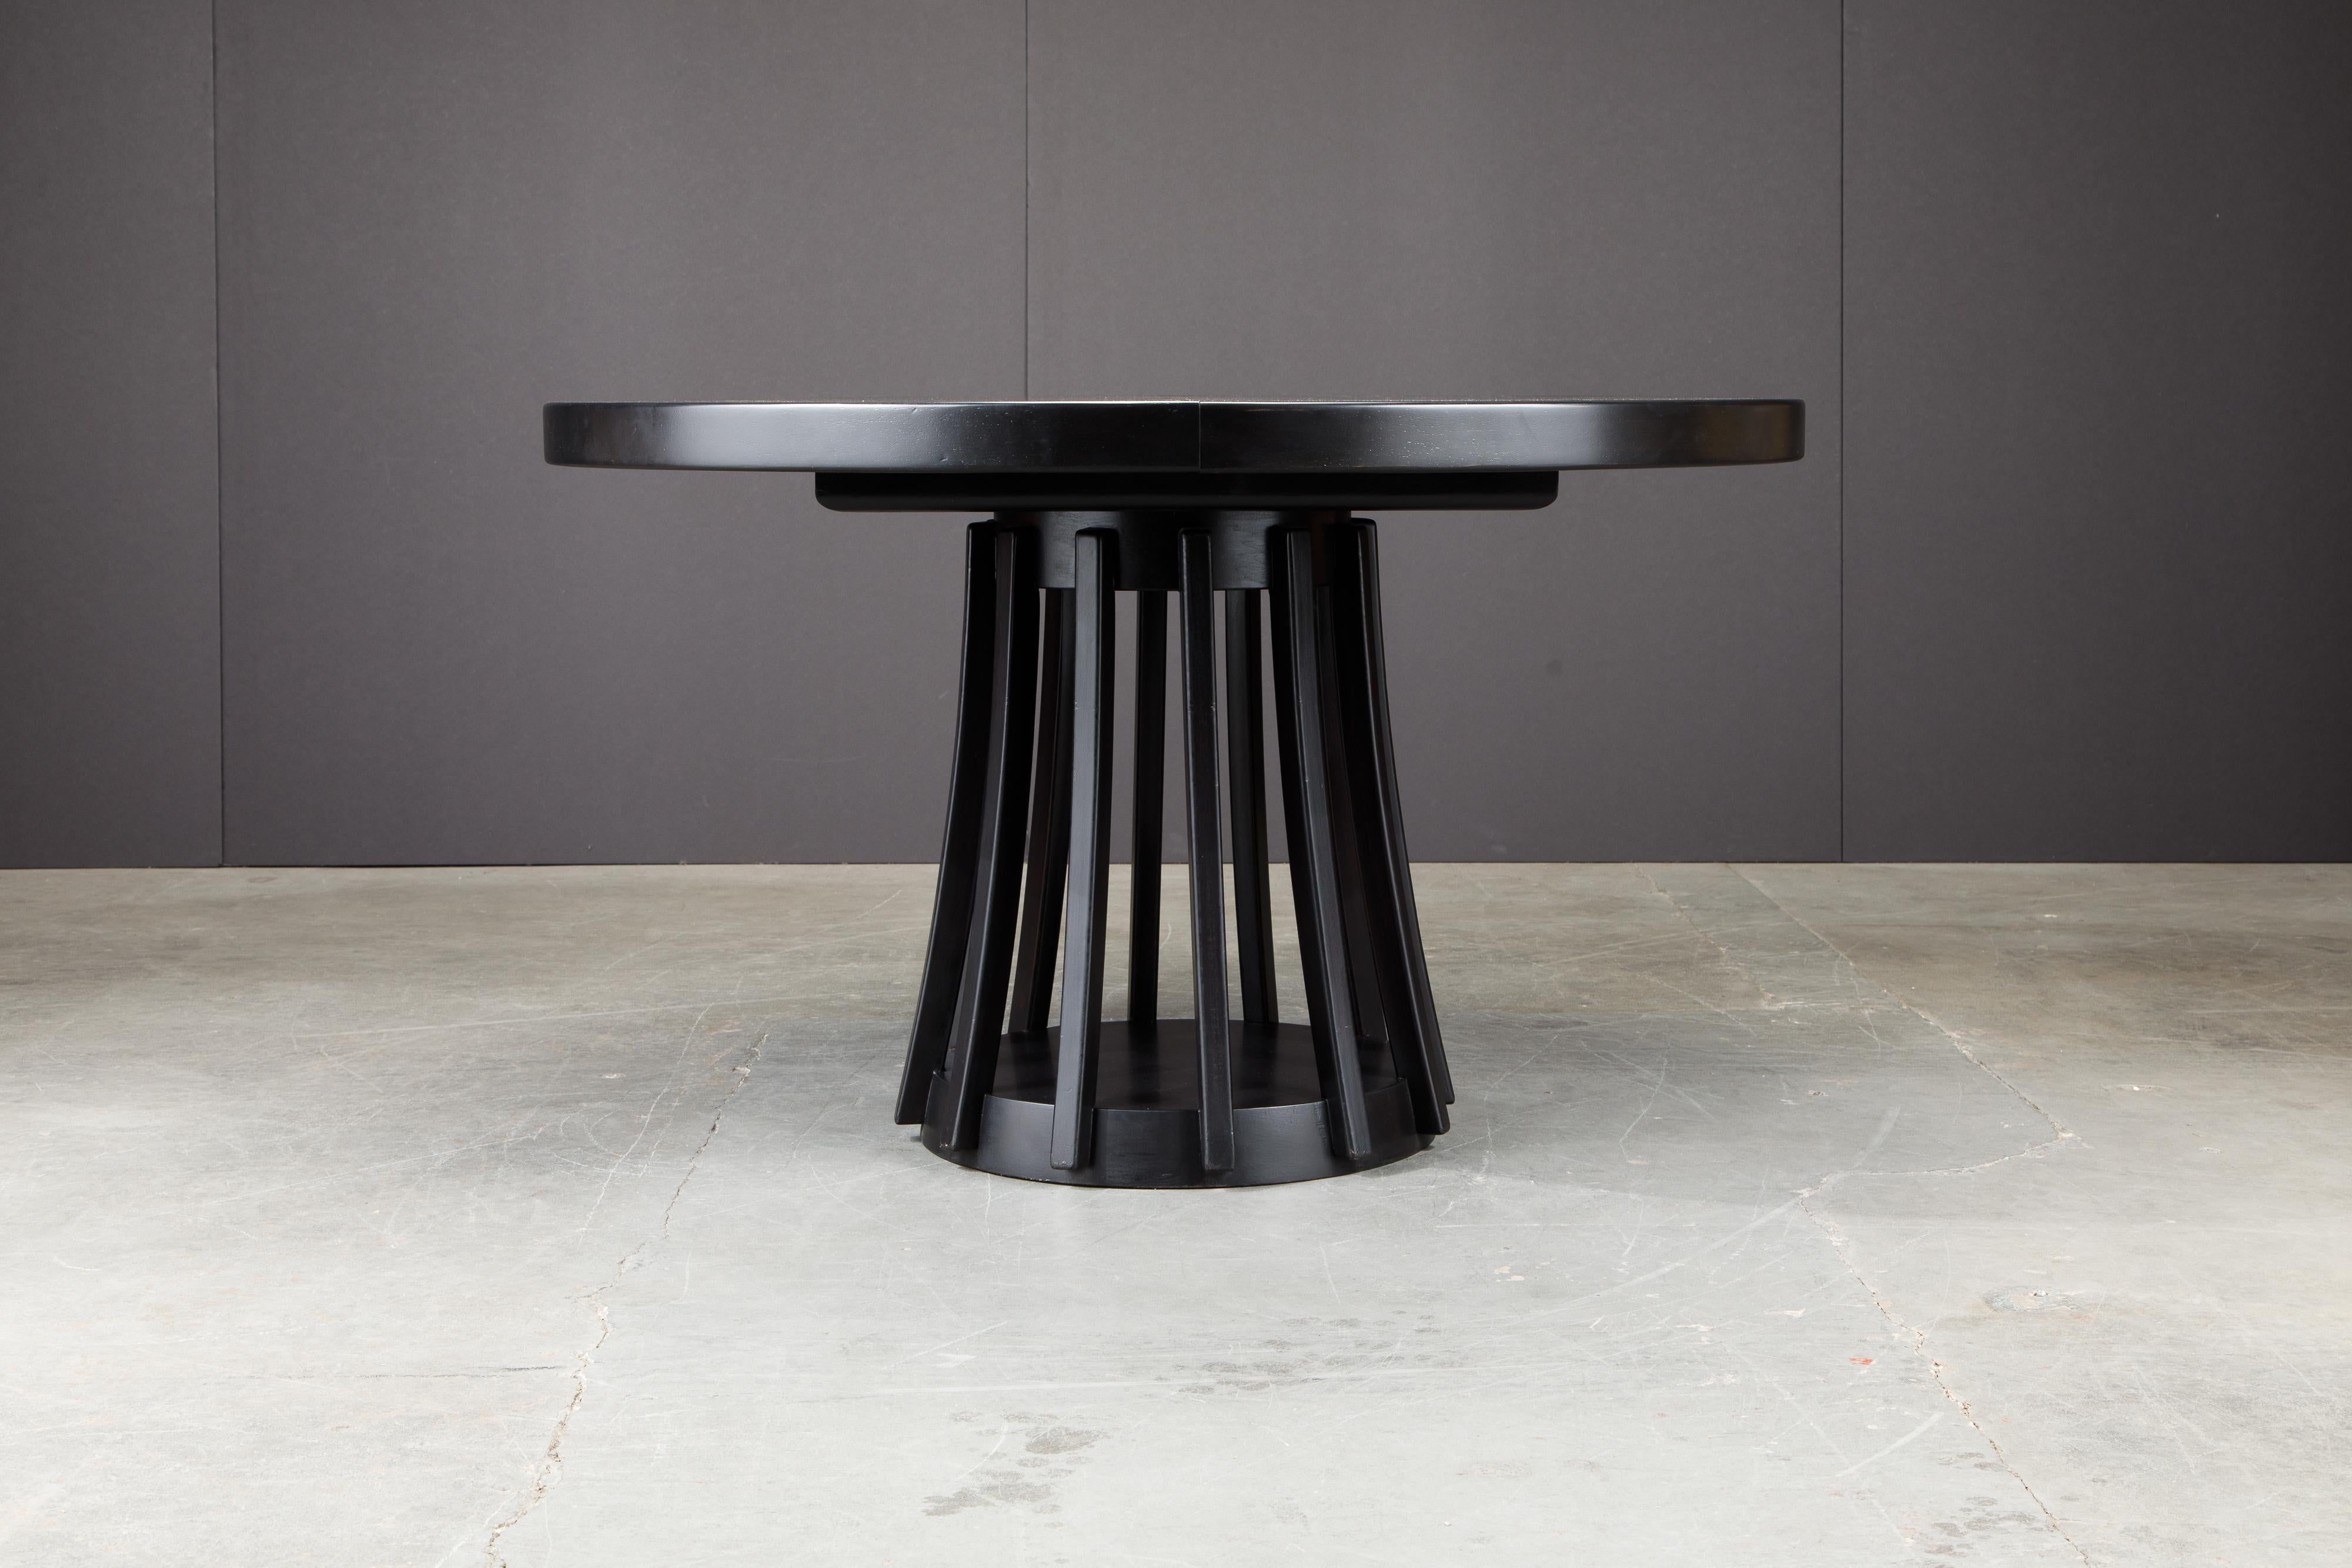 This beautiful extendable ebonized wood dining table was designed by Angelo Mangiarotti in 1972 and manufactured by Sorgente del Mobili, Italy as part of the 'Programma S11' series. This dining table features twelve slatted lefts connected to a